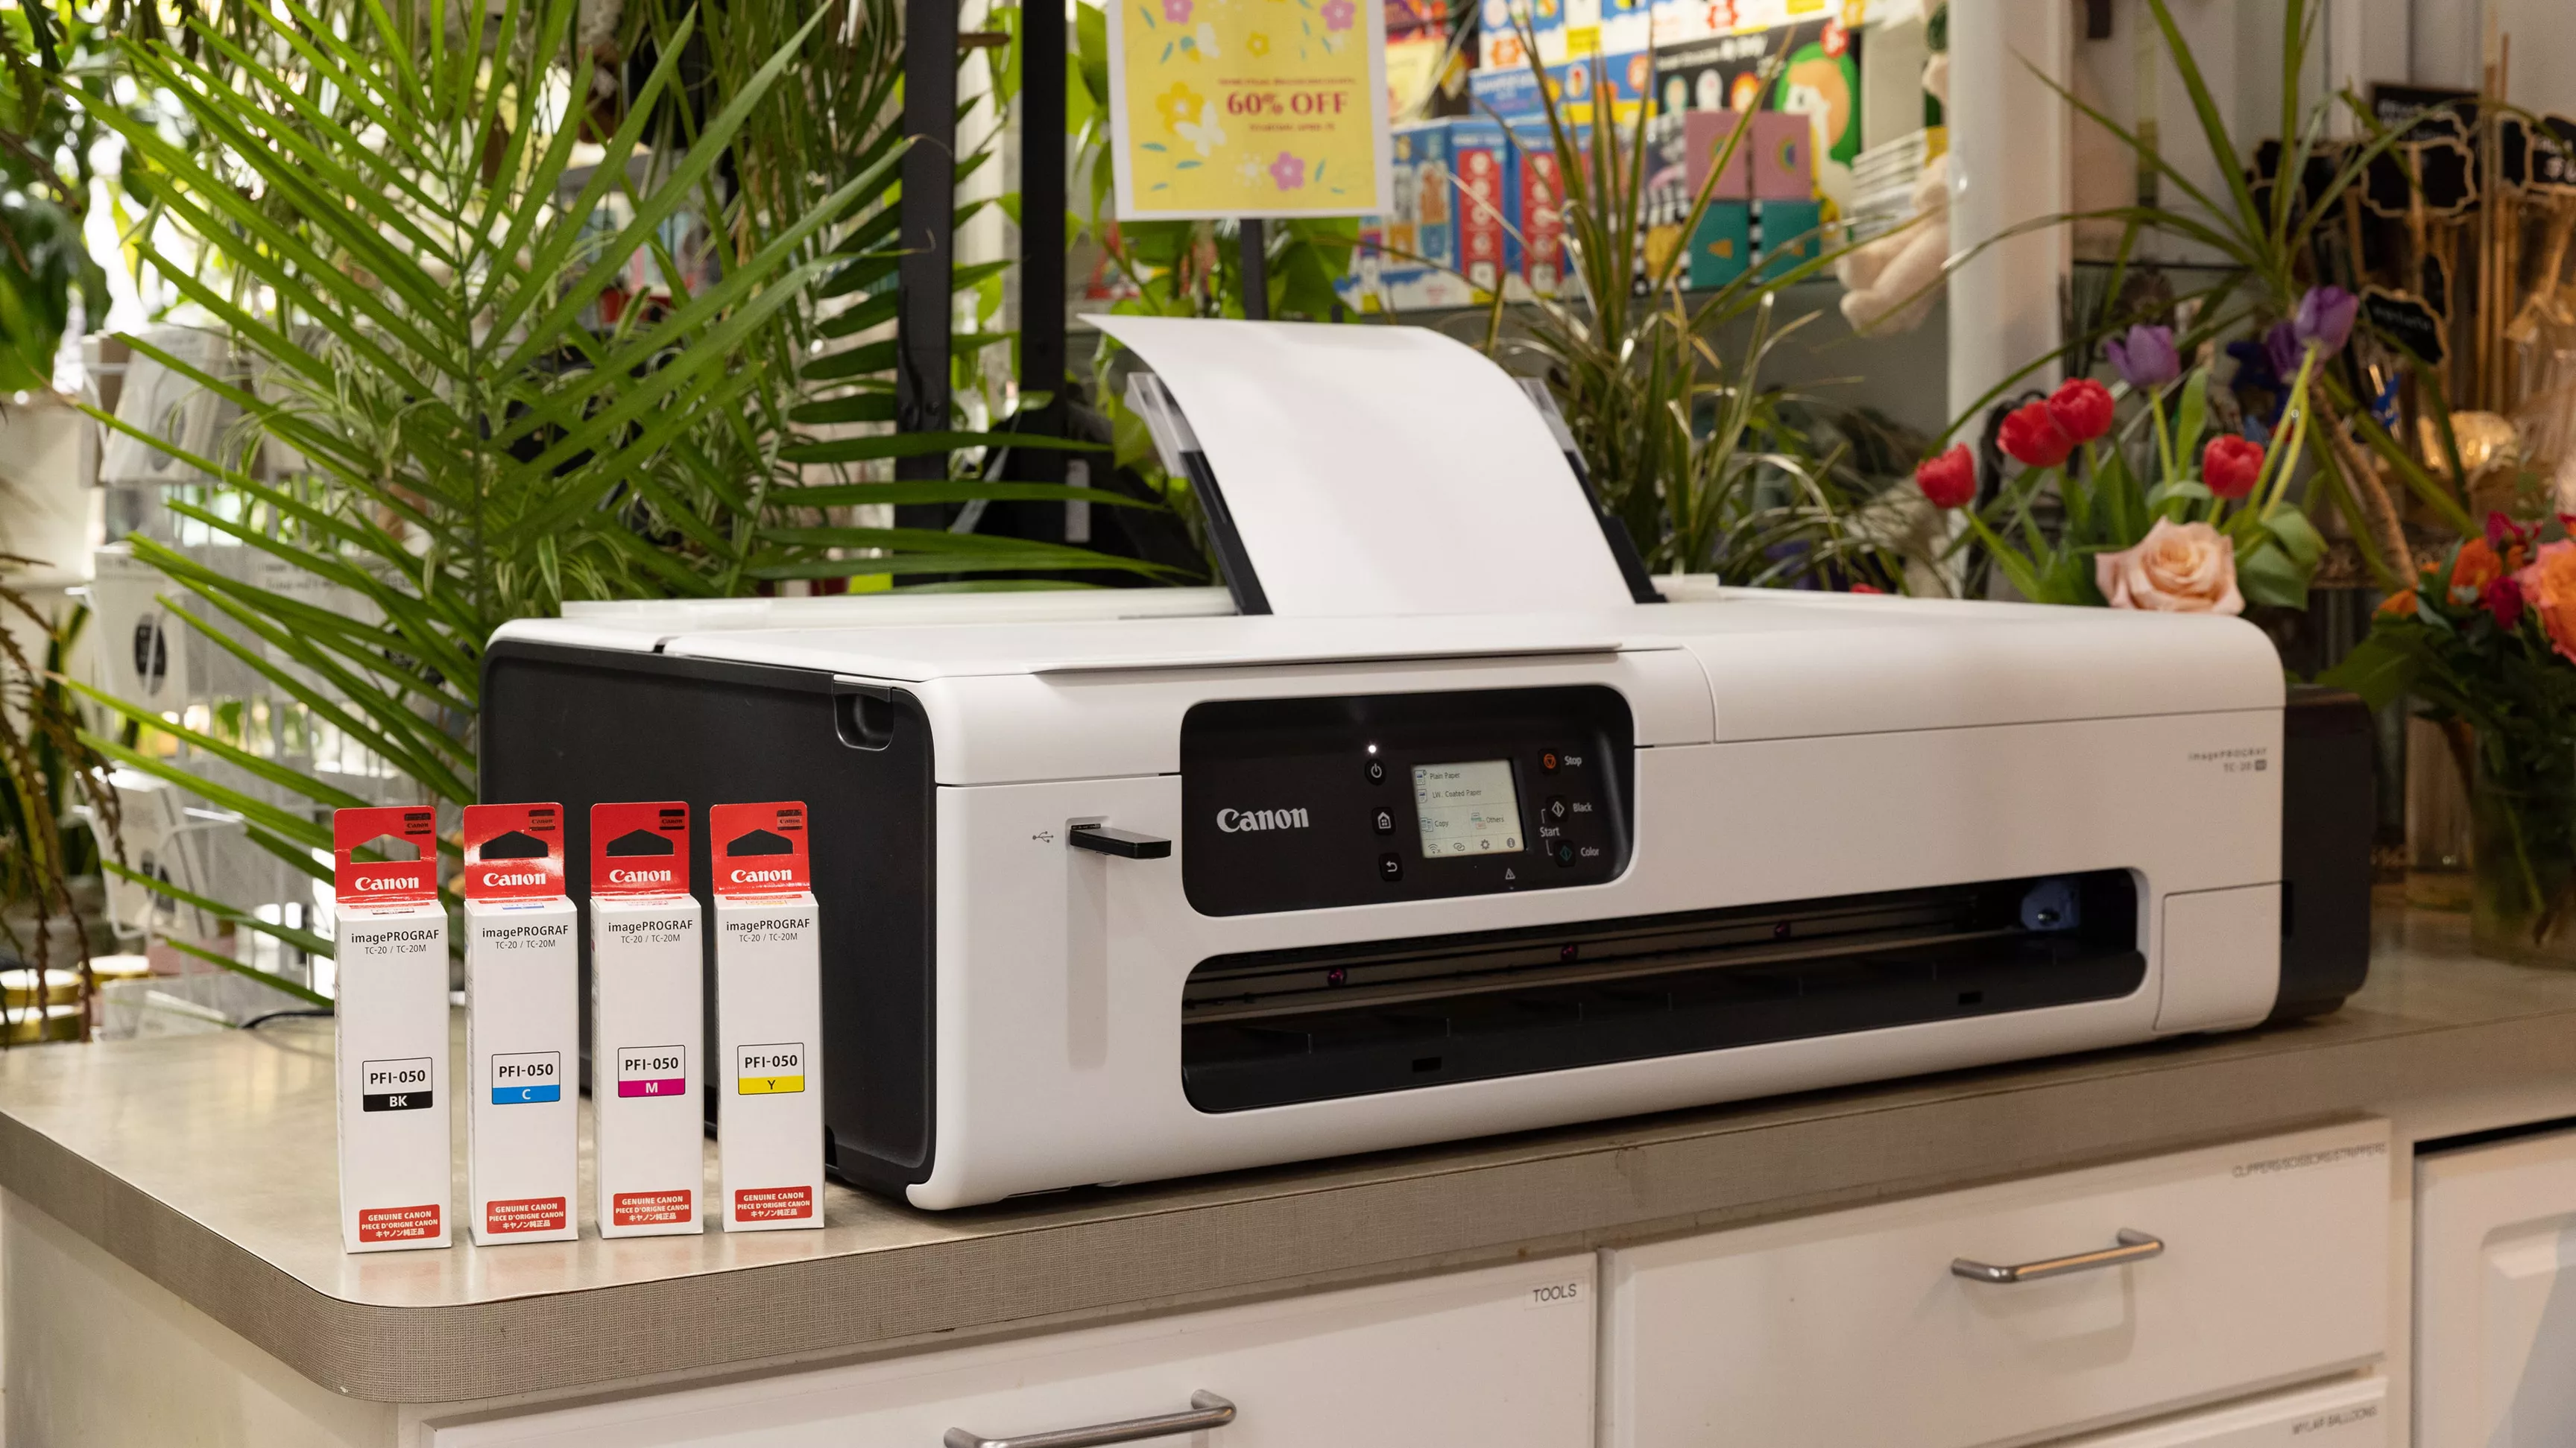 Rent Canon PIXMA TS3350 Series Printer & Scanner in Hayes (rent for £10.00  / day, £5.00 / week)